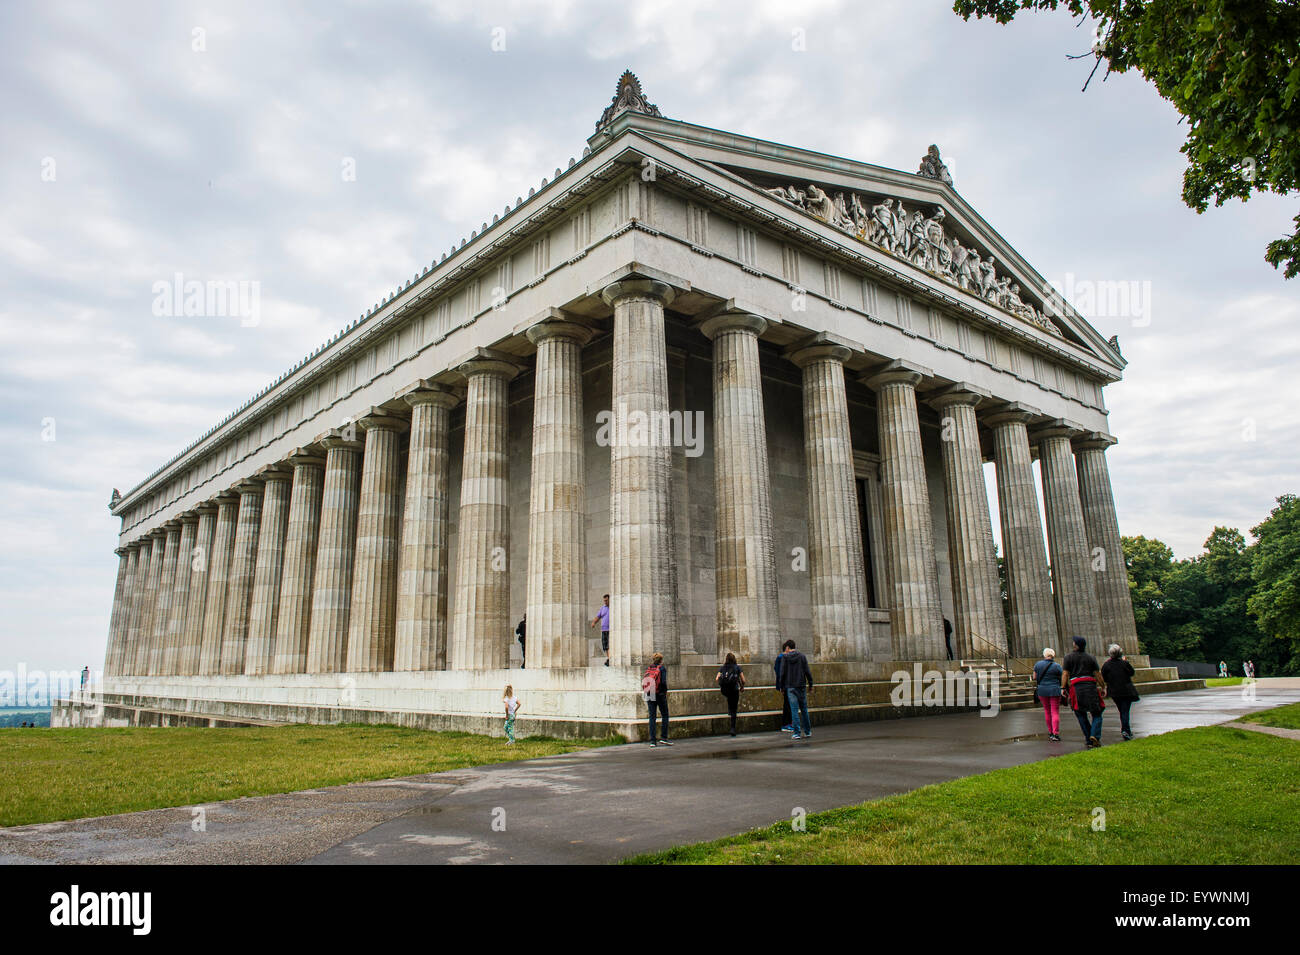 Neo-classical Walhalla hall of fame on the Danube. Bavaria, Germany, Europe Stock Photo